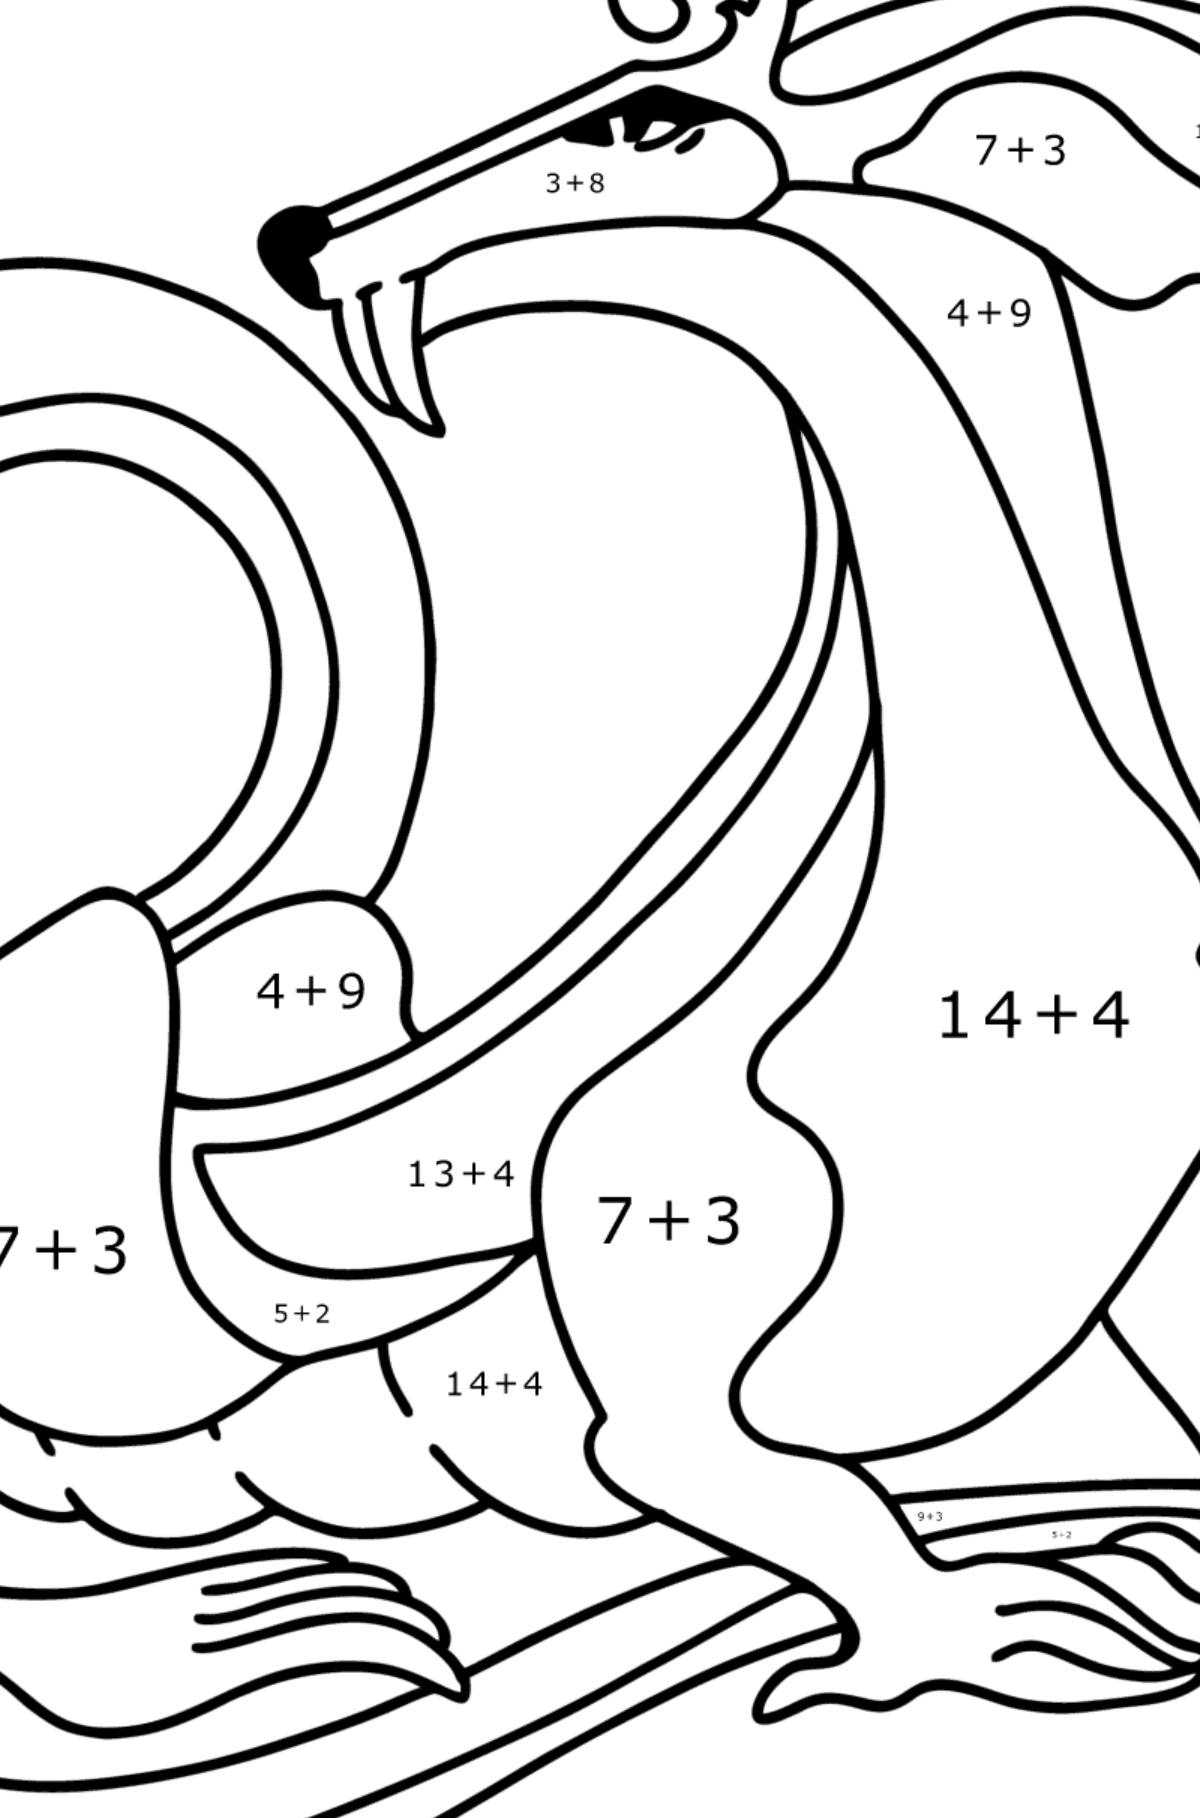 Calm Dragon coloring page - Math Coloring - Addition for Kids